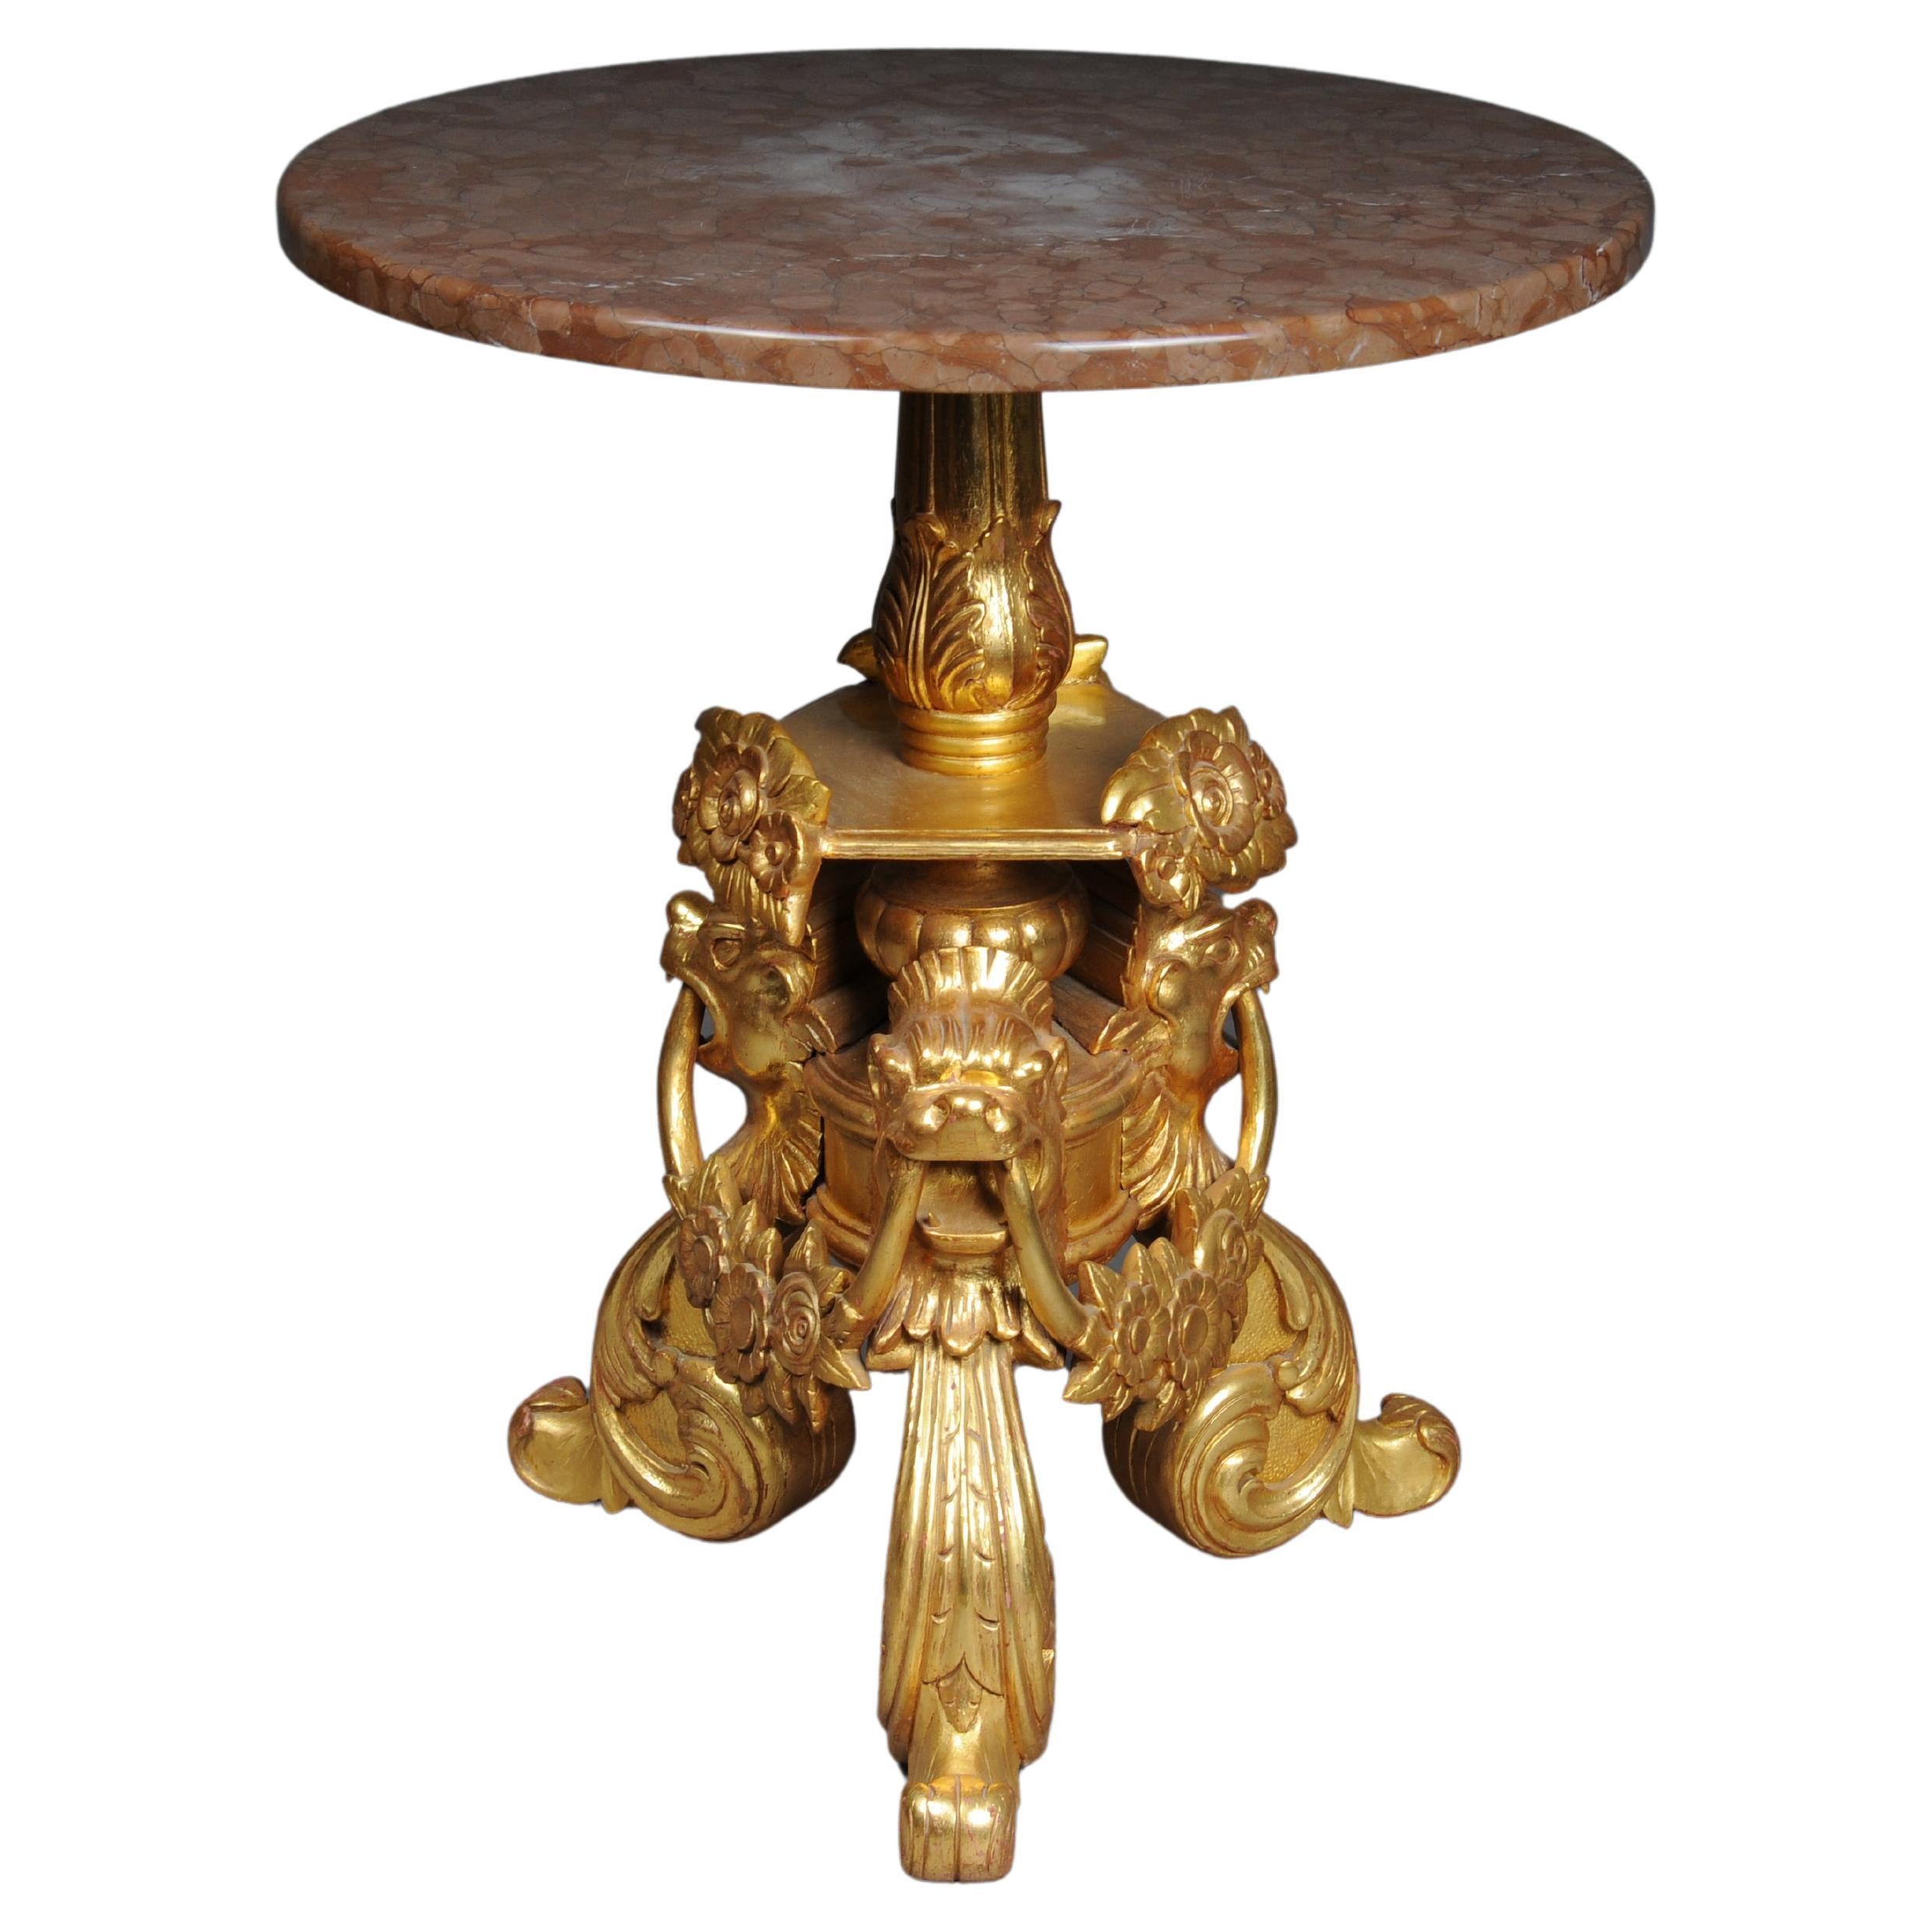 20th Century Royal ornate side table gilded with marble top